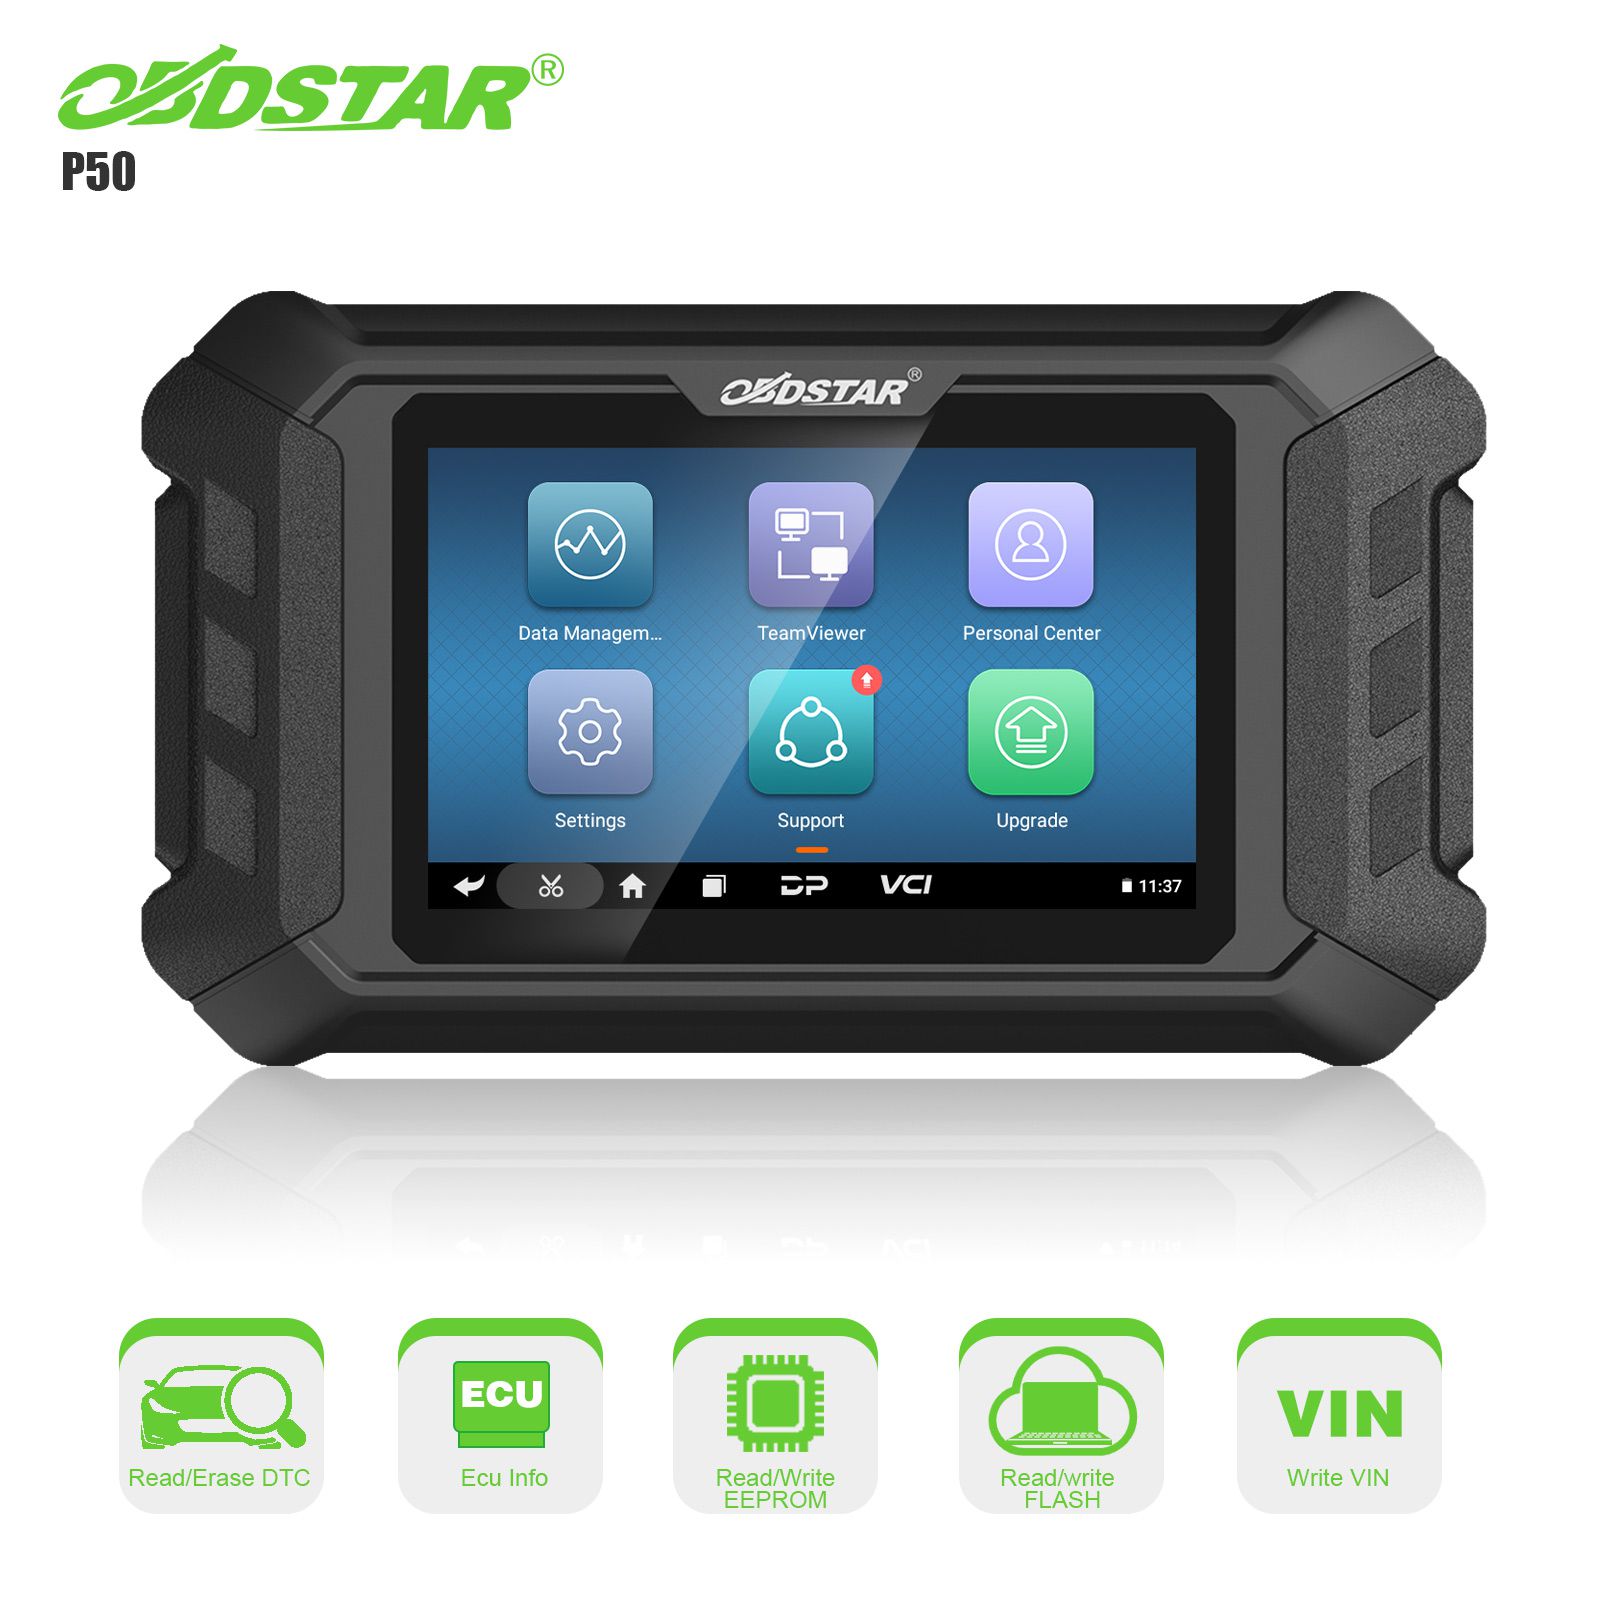 OBDSTAR P50 Airbag Reset Intelligent Airbag Reset Tool Covers 38 Brands and Over 4600+ ECU Part No.